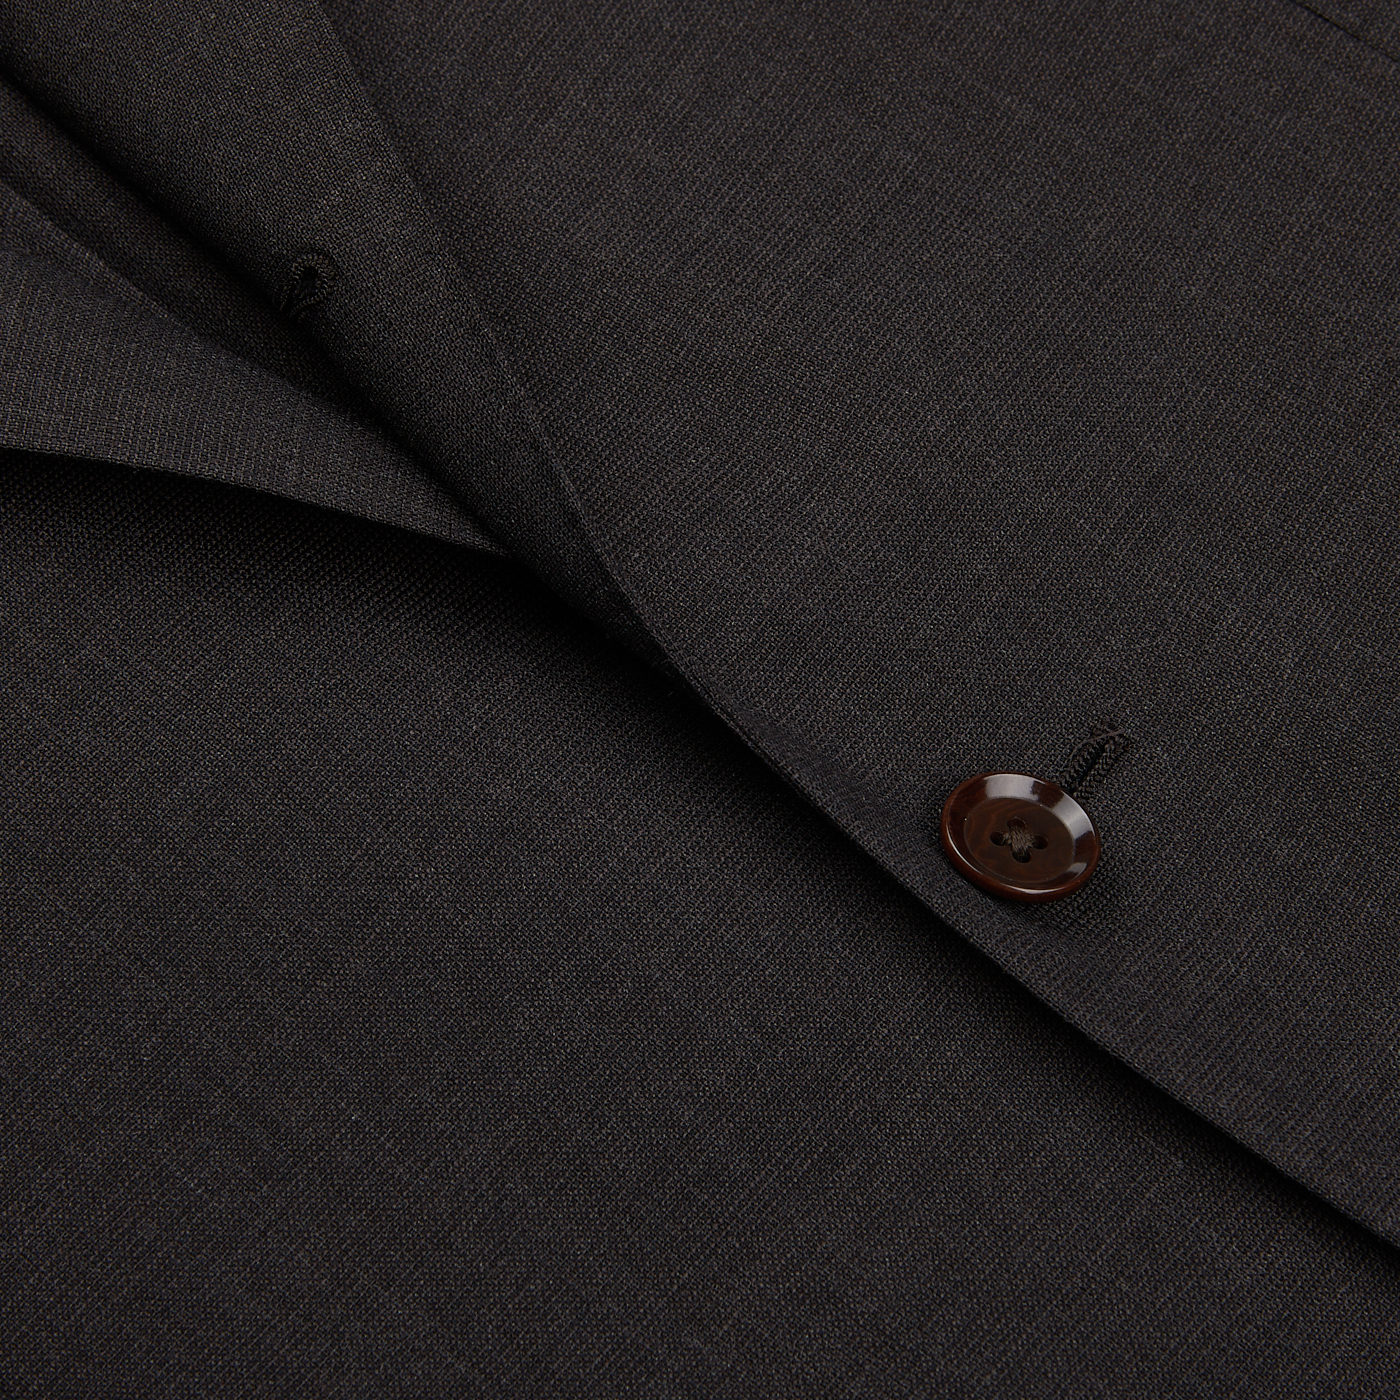 Close-up of a Ring Jacket Dark Brown High Twist Wool Suit fabric with a detailed view of a stitched button.